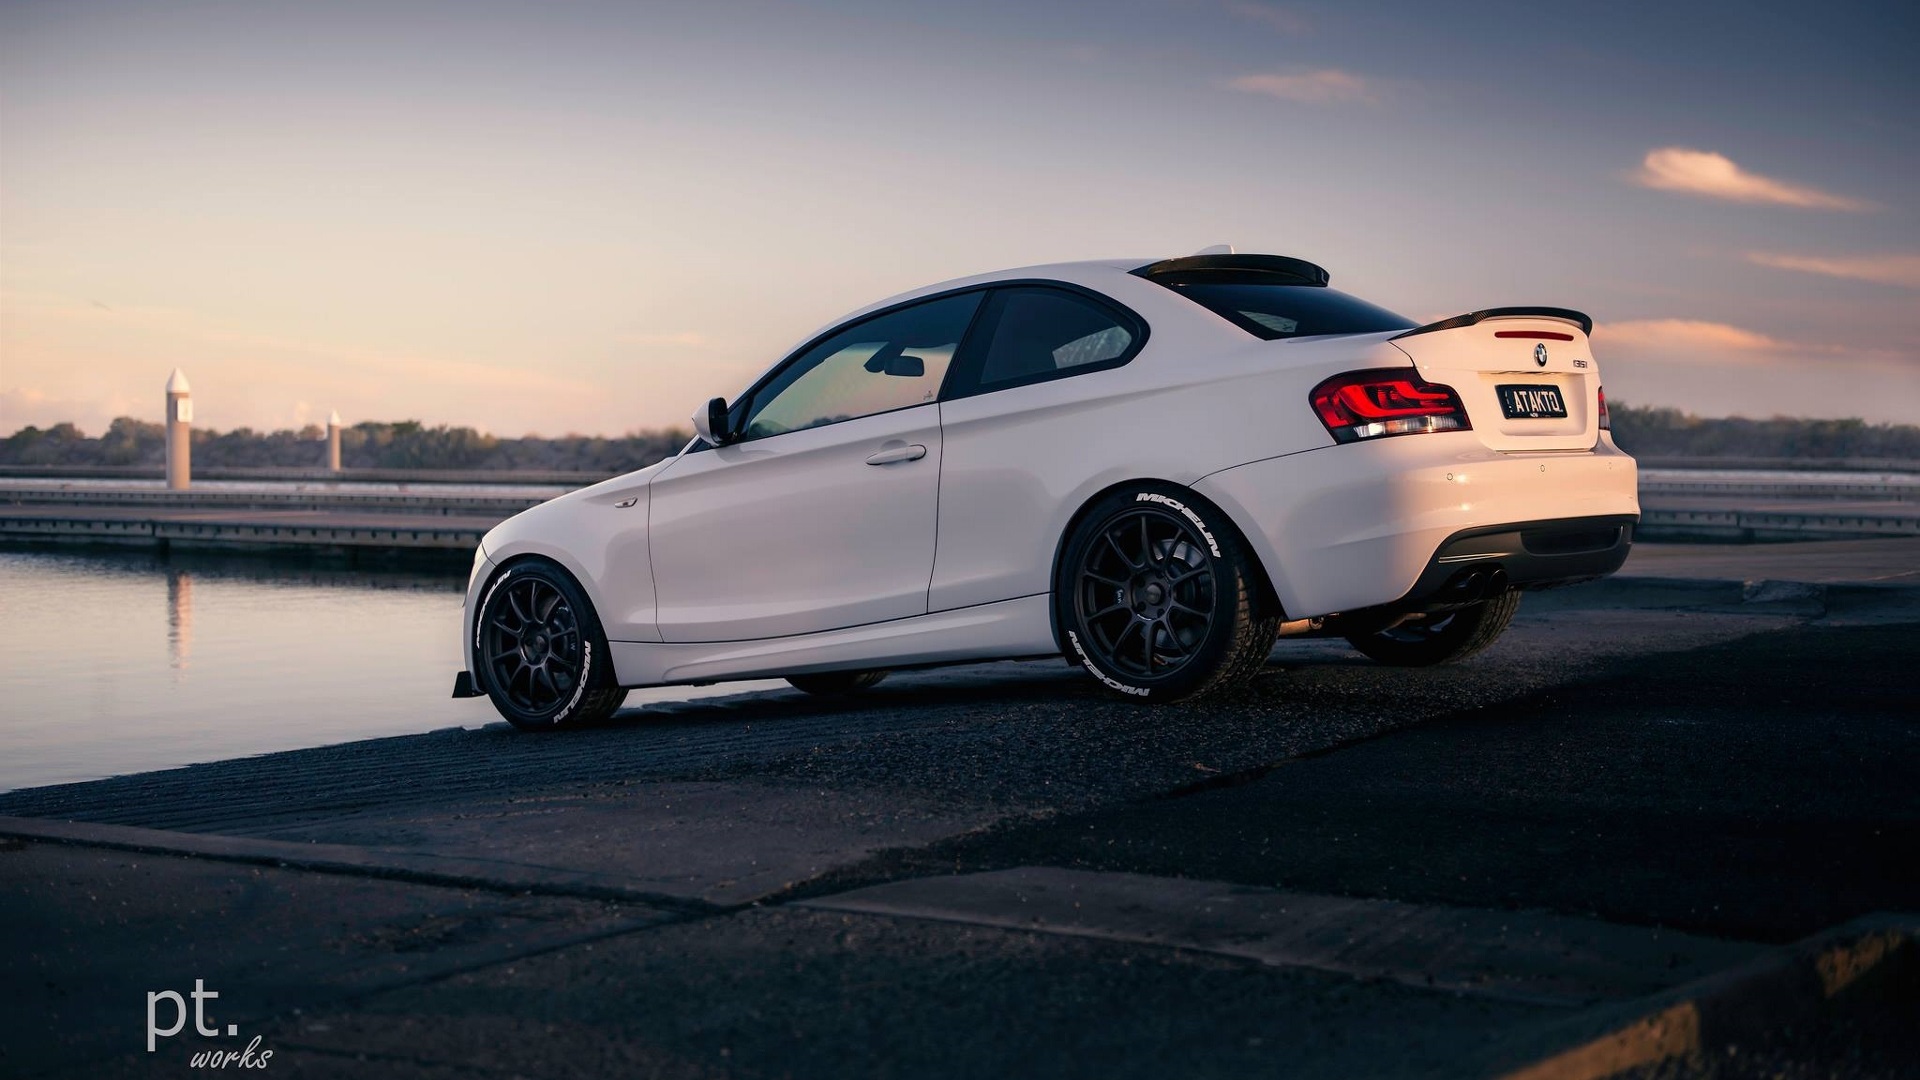 General 1920x1080 BMW German cars white cars sports car car vehicle sky clouds water outdoors PT works